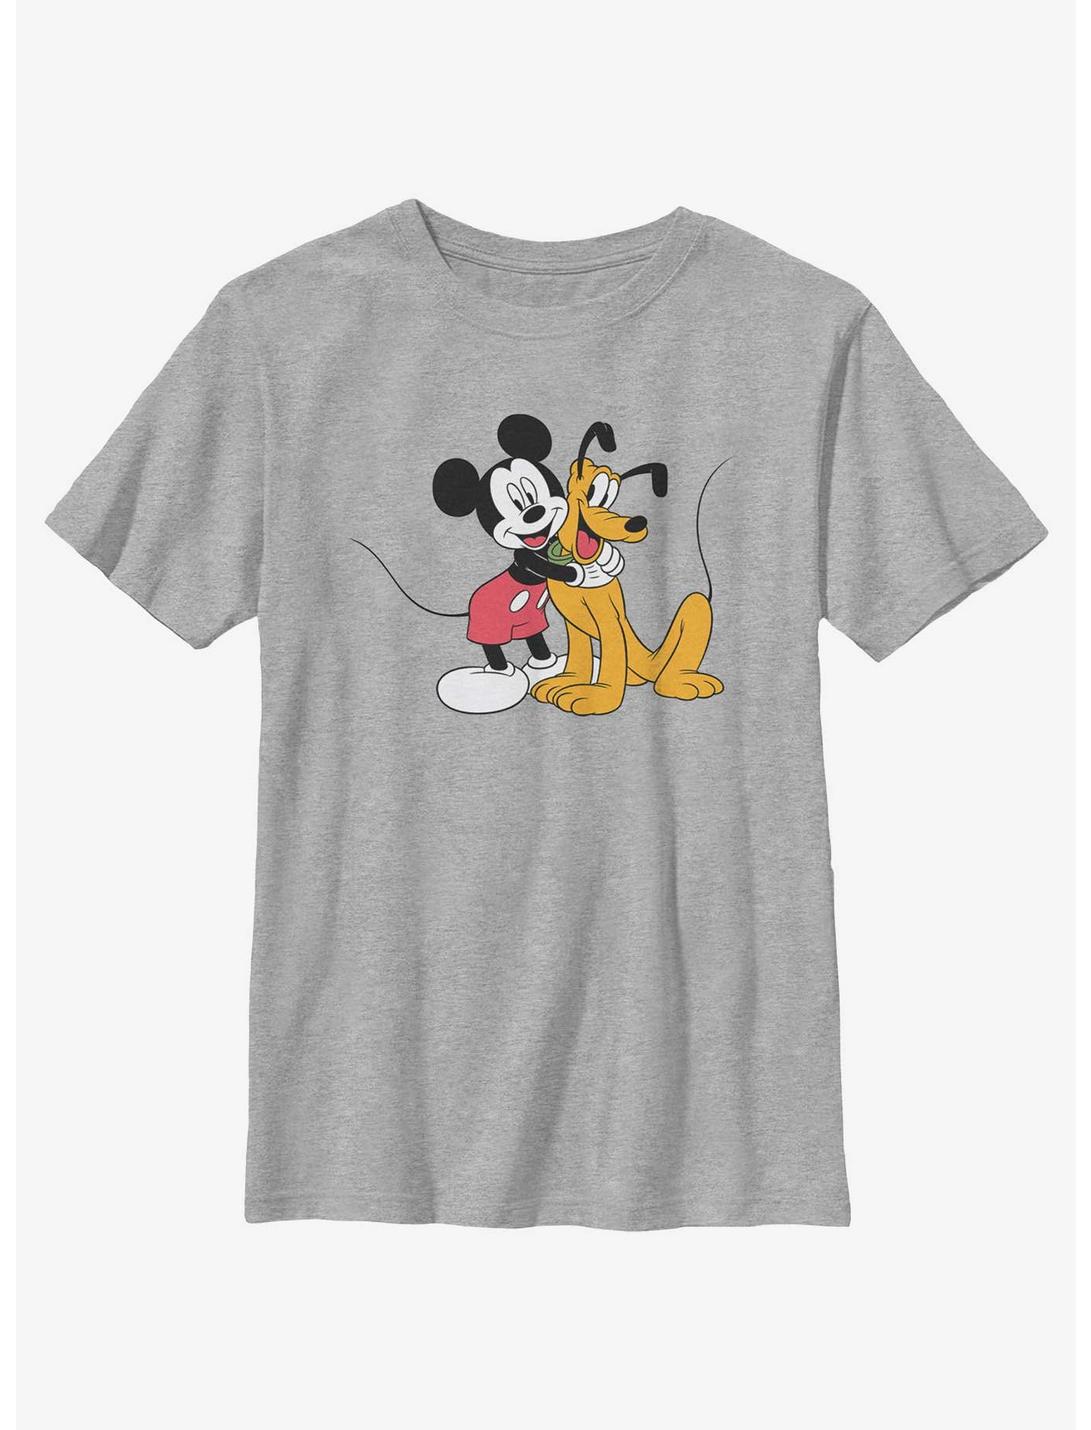 Disney Mickey Mouse & Pluto Hugs Youth T-Shirt, ATH HTR, hi-res